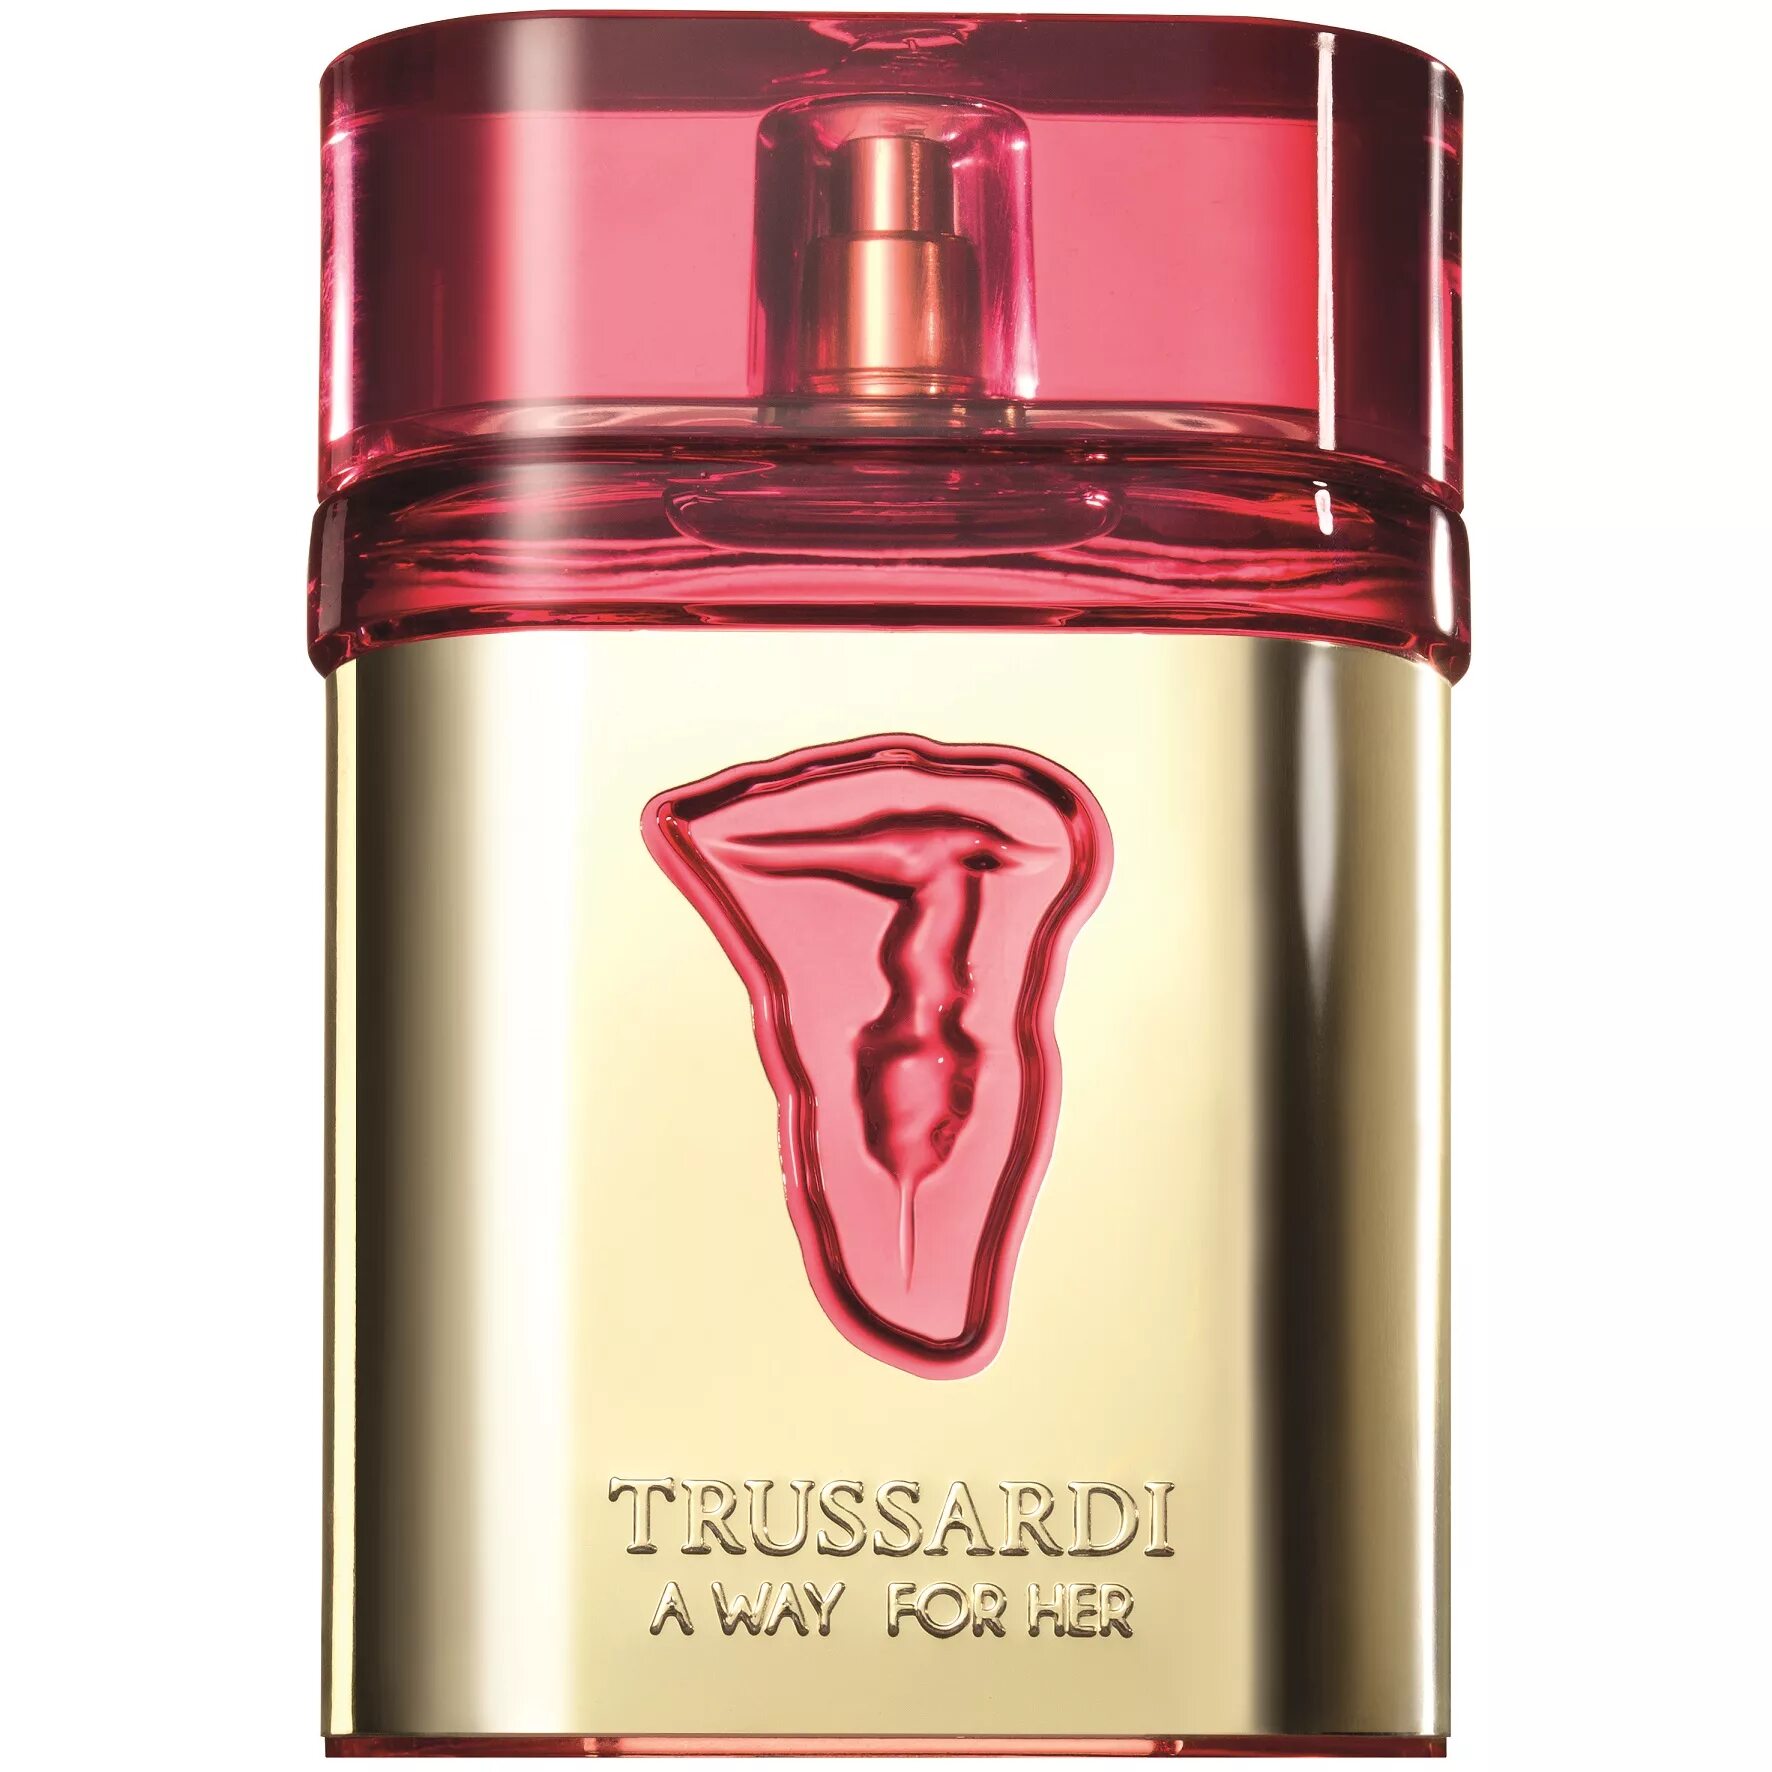 Trussardi a way for her. Trussardi a way for her 50 ml. Труссарди духи a way for her. Trussardi a way Lady 100ml EDT New. Trussardi купить женское